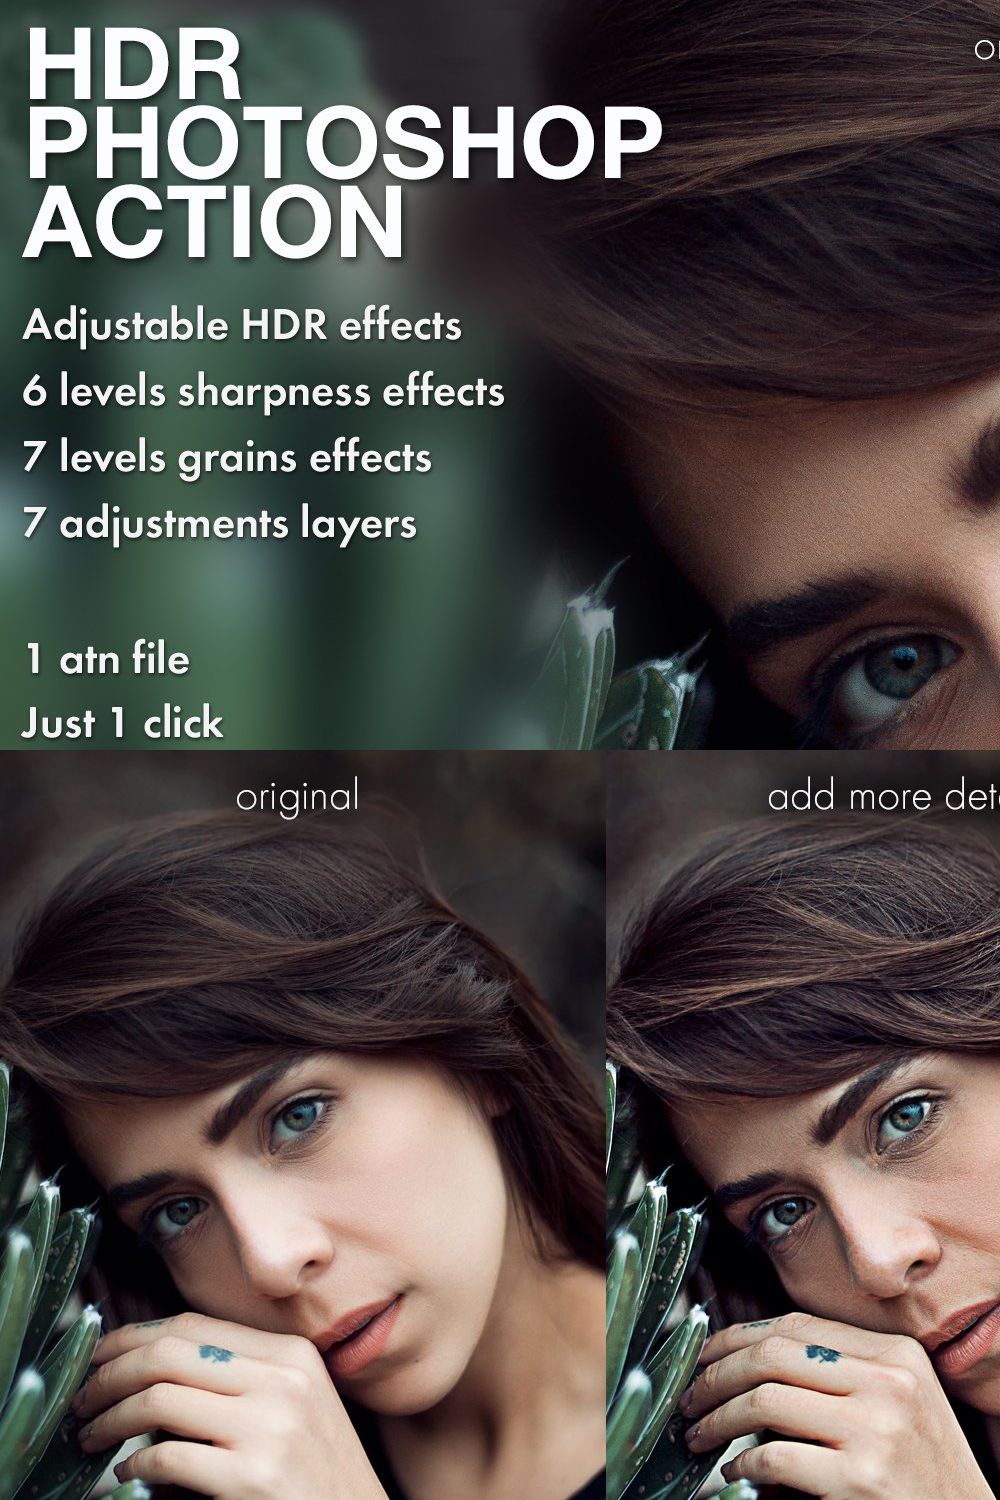 HDR Photoshop Action pinterest preview image.